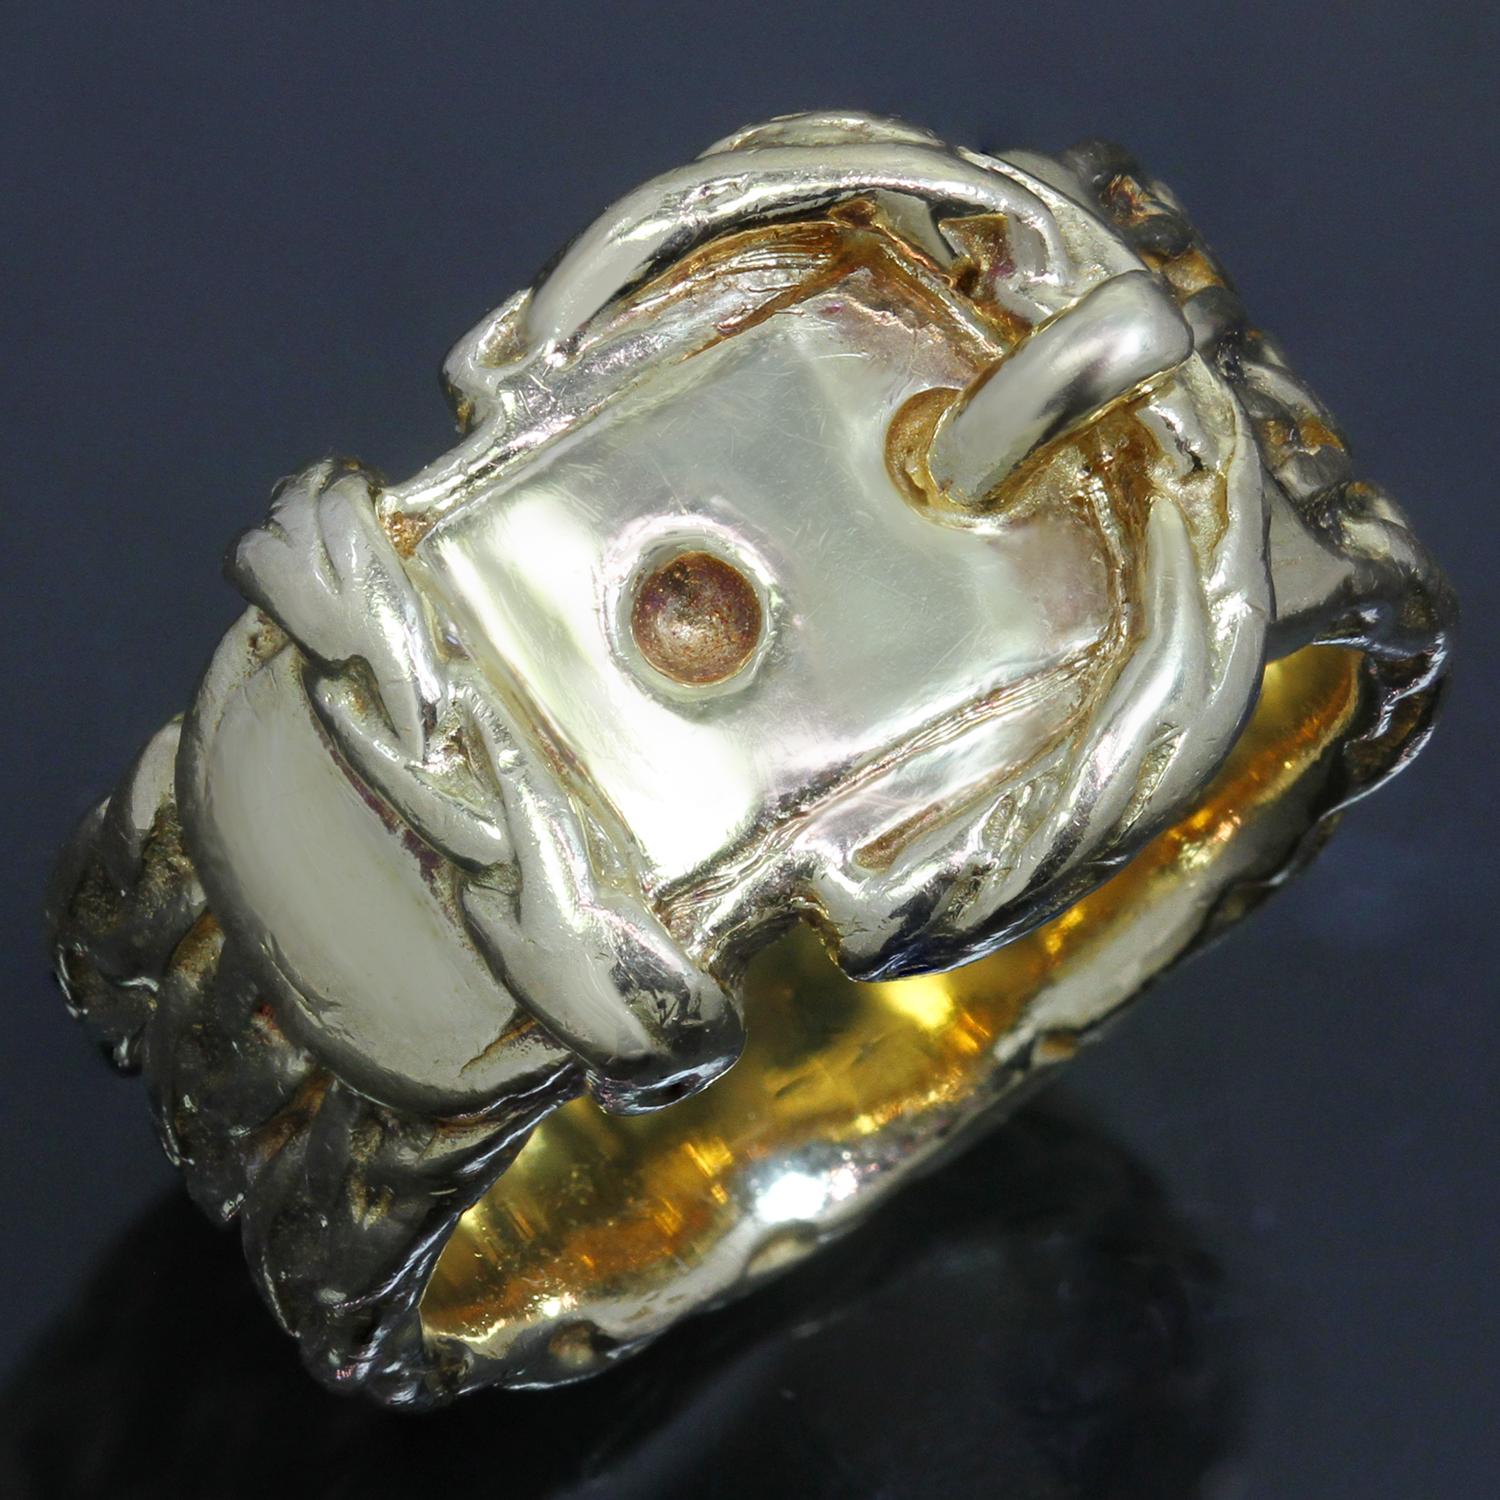 This elegant Hermes ring features the shape of a buckle crafted in 18k yellow gold. Made in France in the late 20th century. Measurements: 0.51